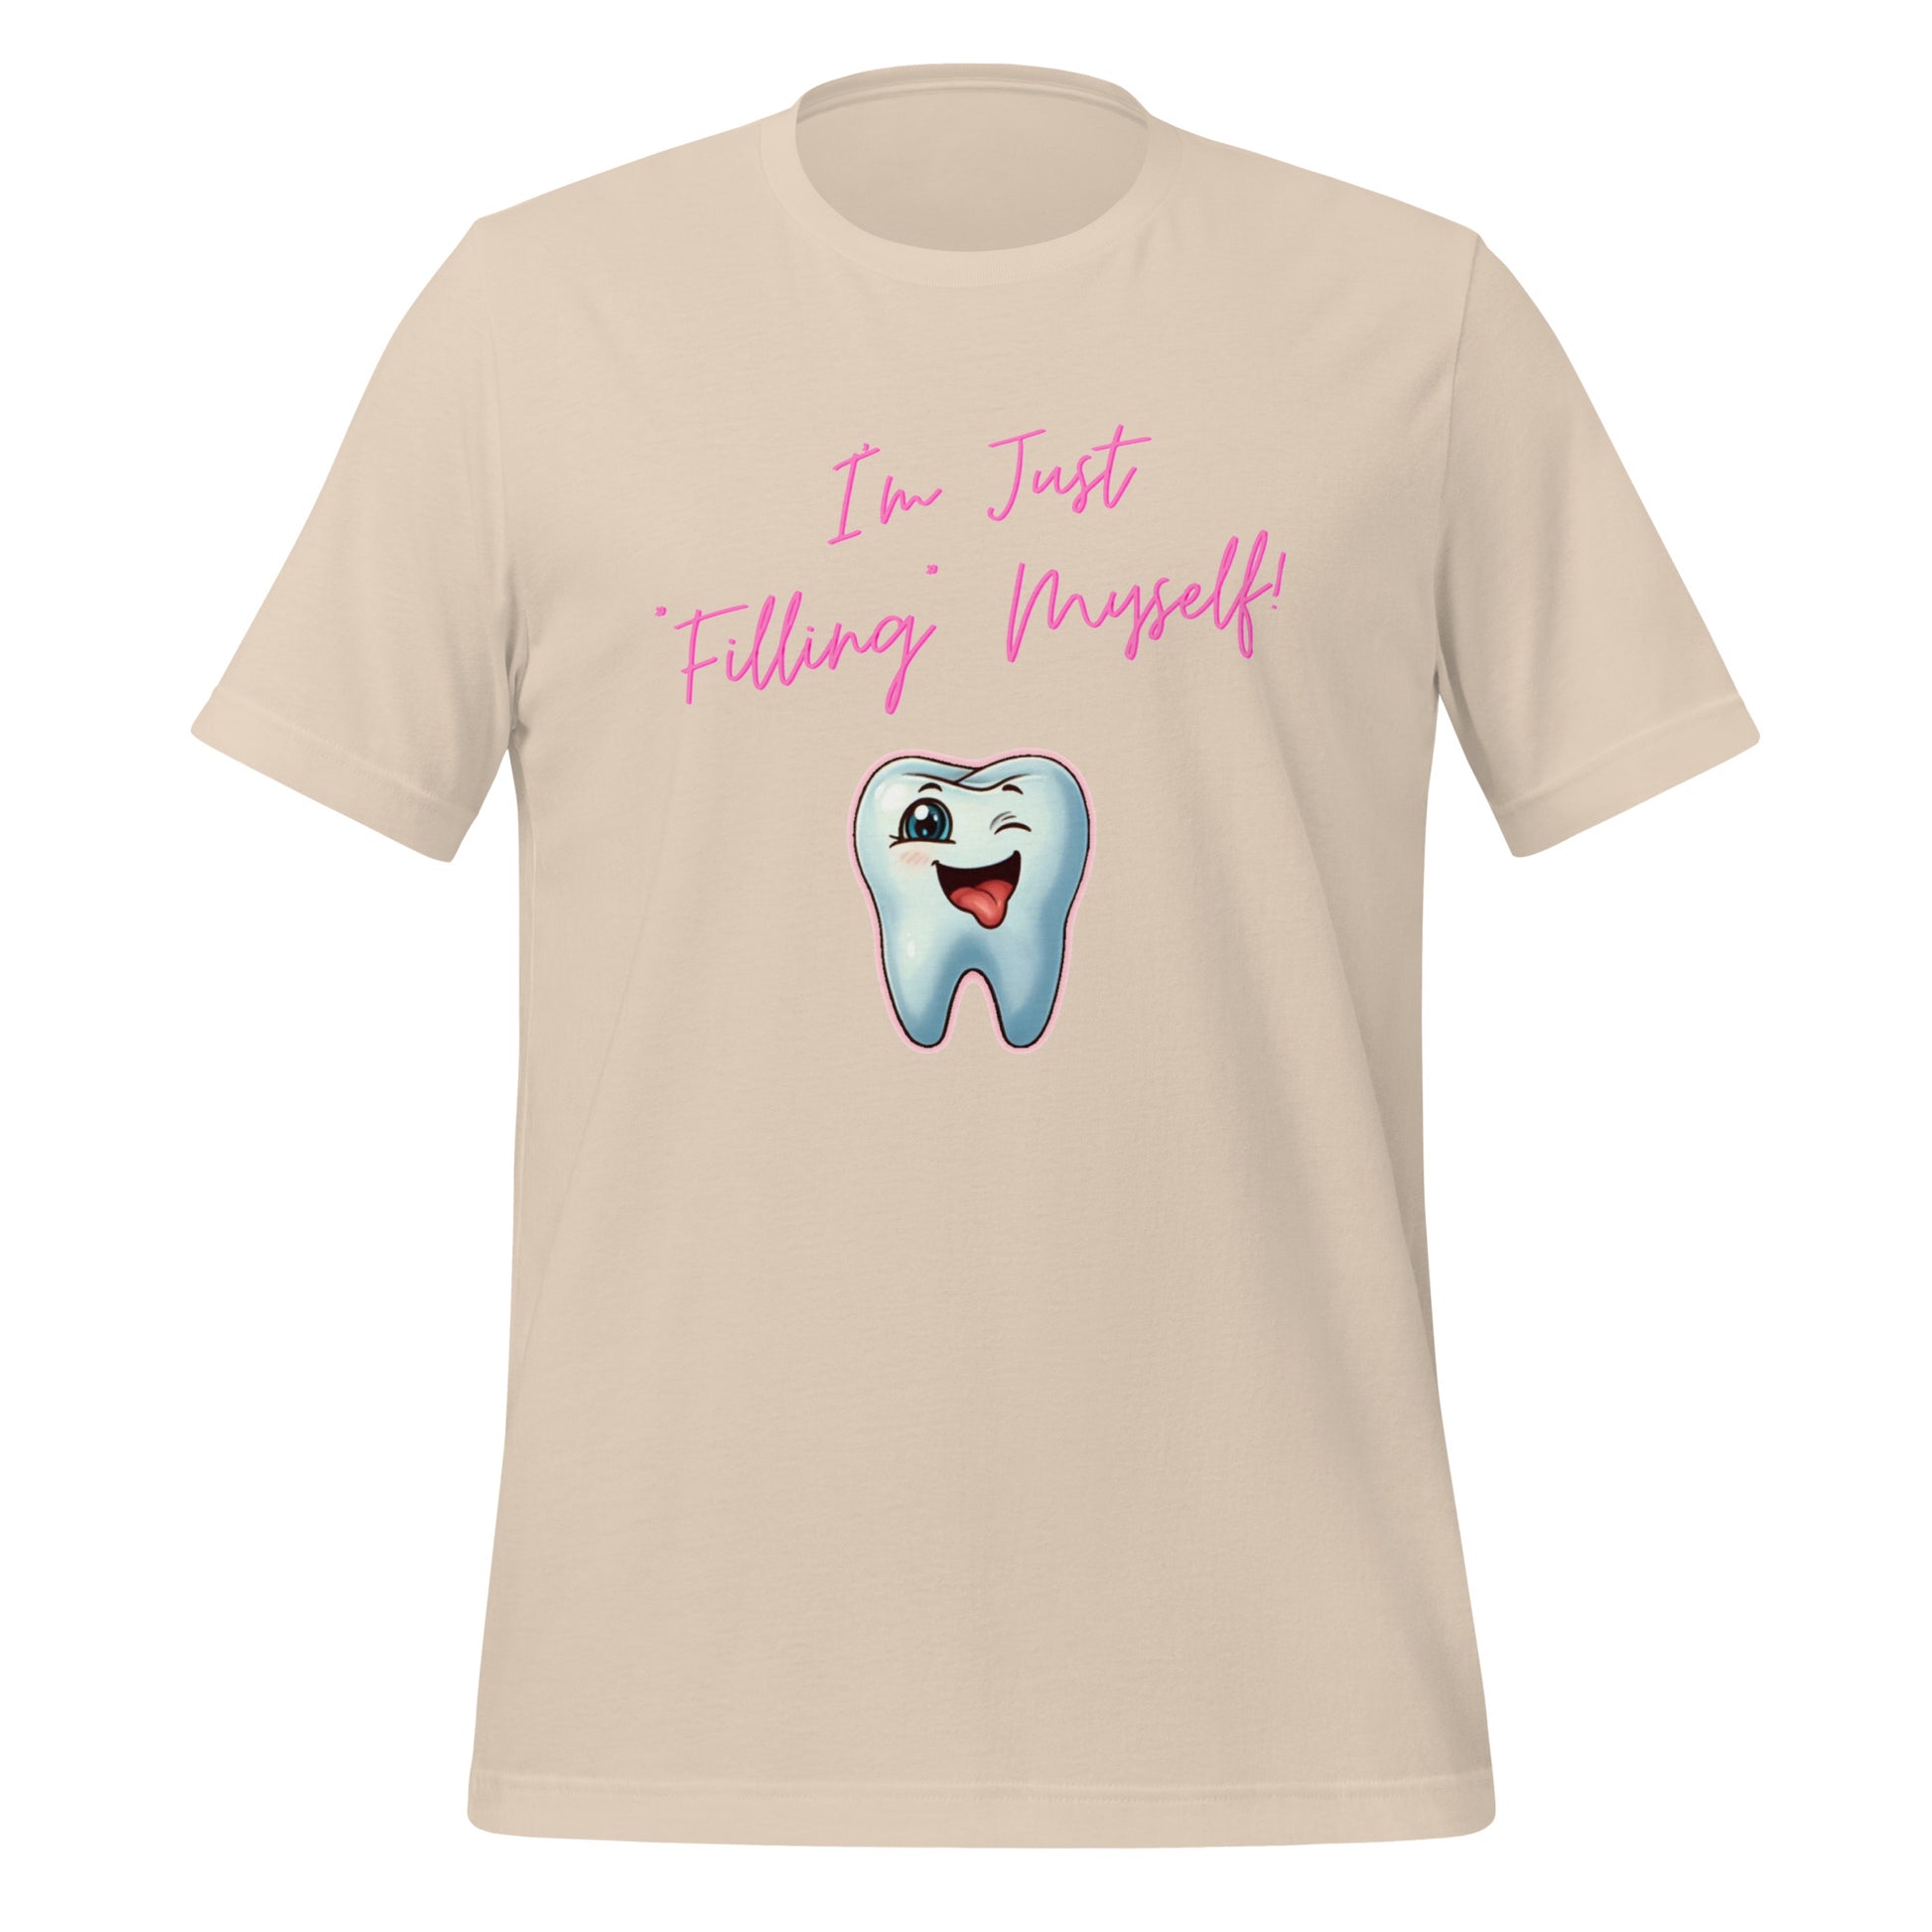 Flirtatious winking cartoon tooth character with the phrase "I'm just filling myself!" Ideal for a funny dental t-shirt or a cute dental assistant shirt. Soft cream color. 